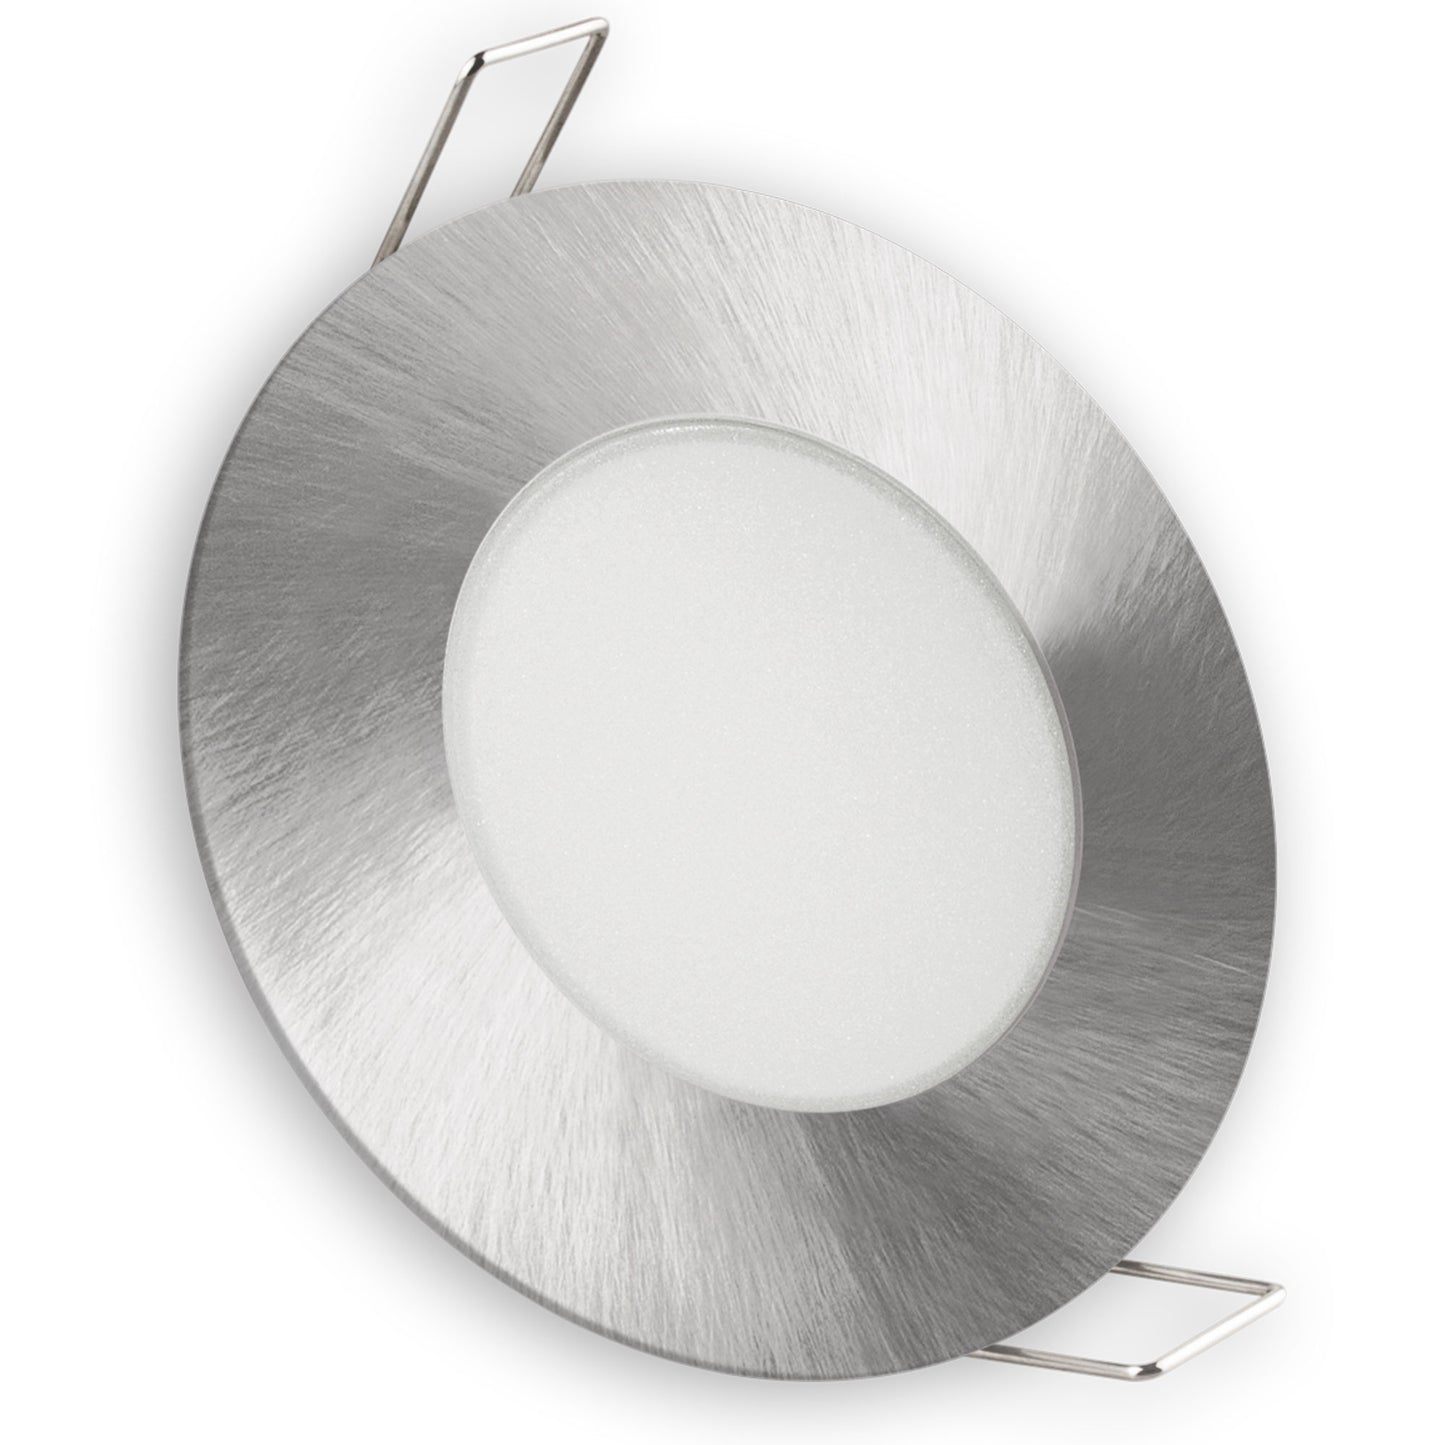 FIXED MATEL LED RING IP65 ROUND NICKEL 8W COLD 